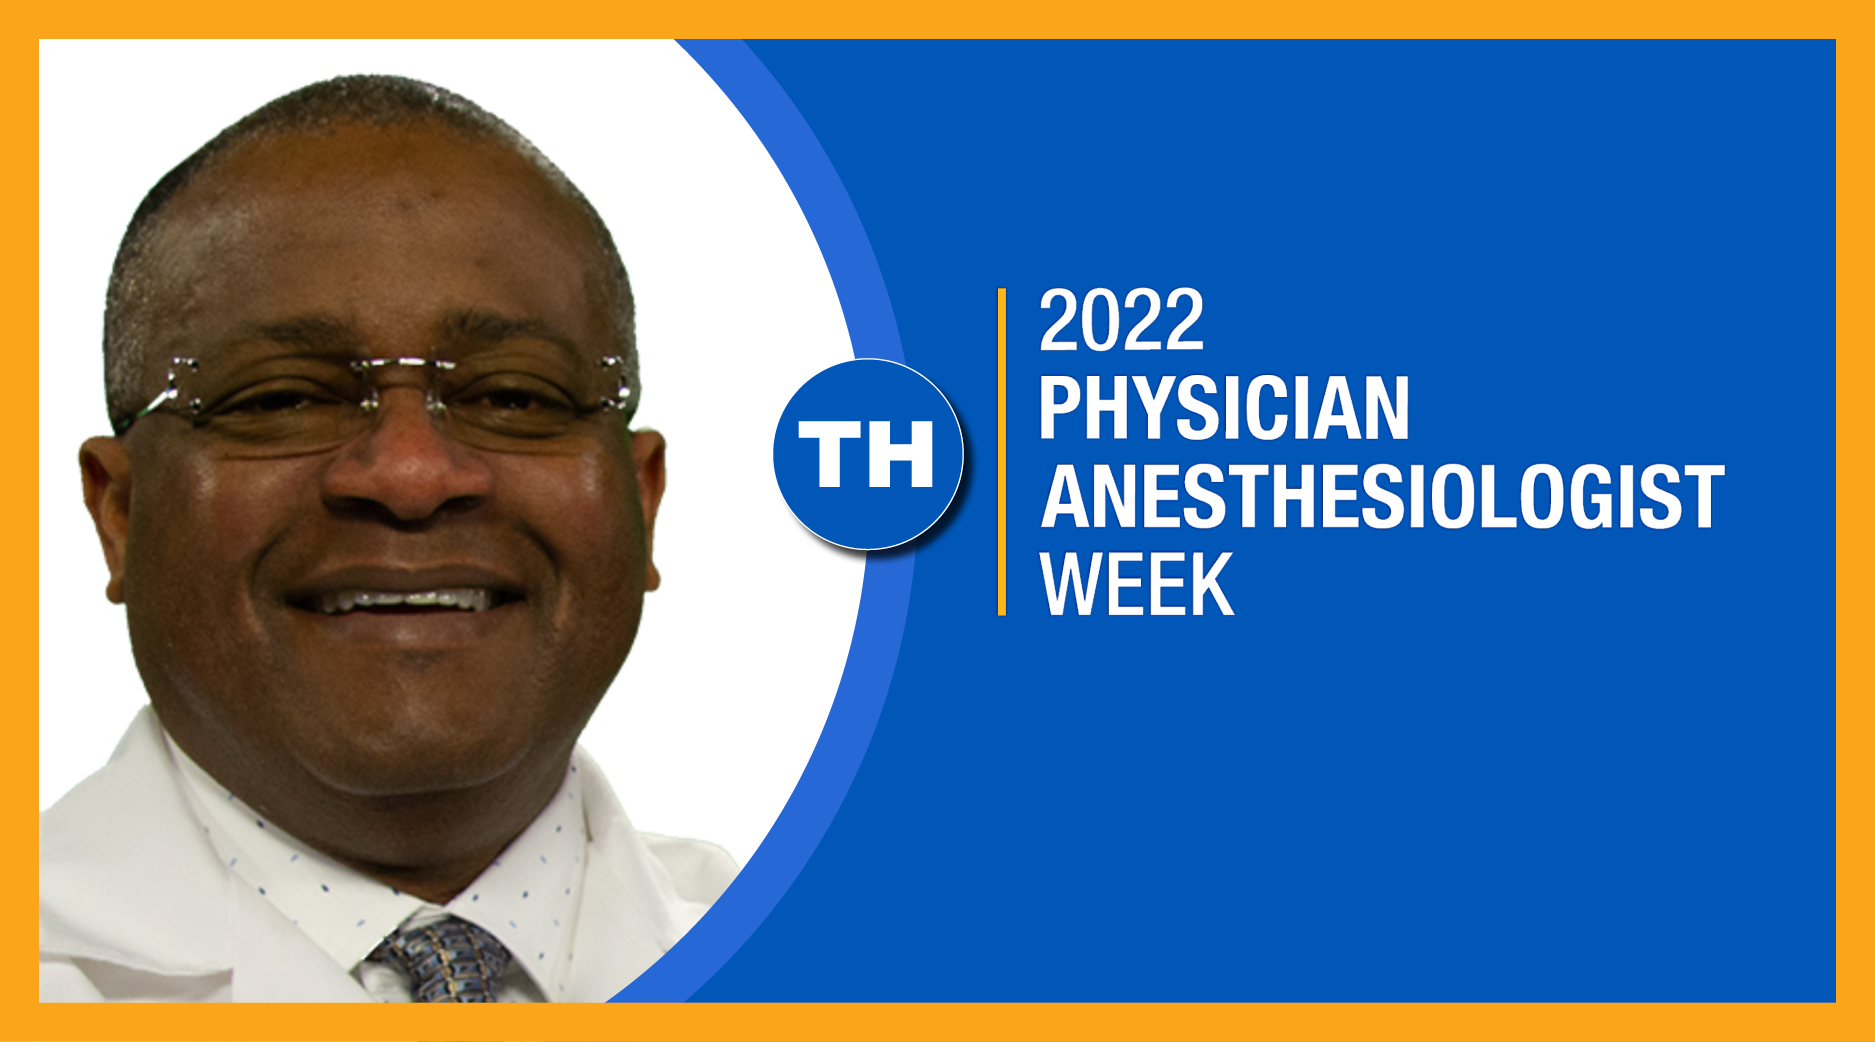 Recognizing Physician Anesthesiologist Week